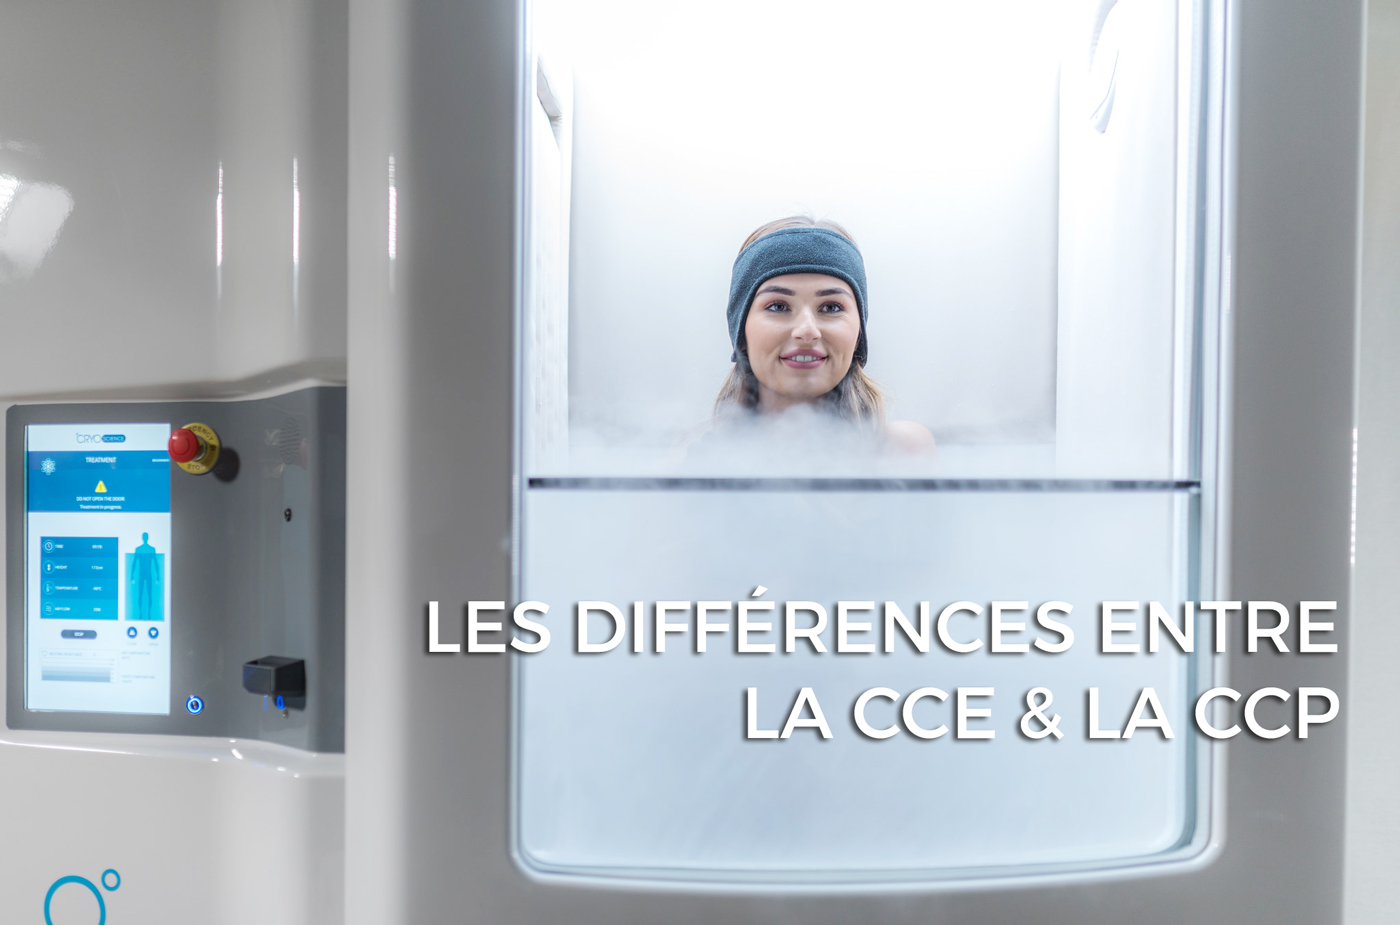 Differences between whole body cryotherapy and partial body cryotherapy